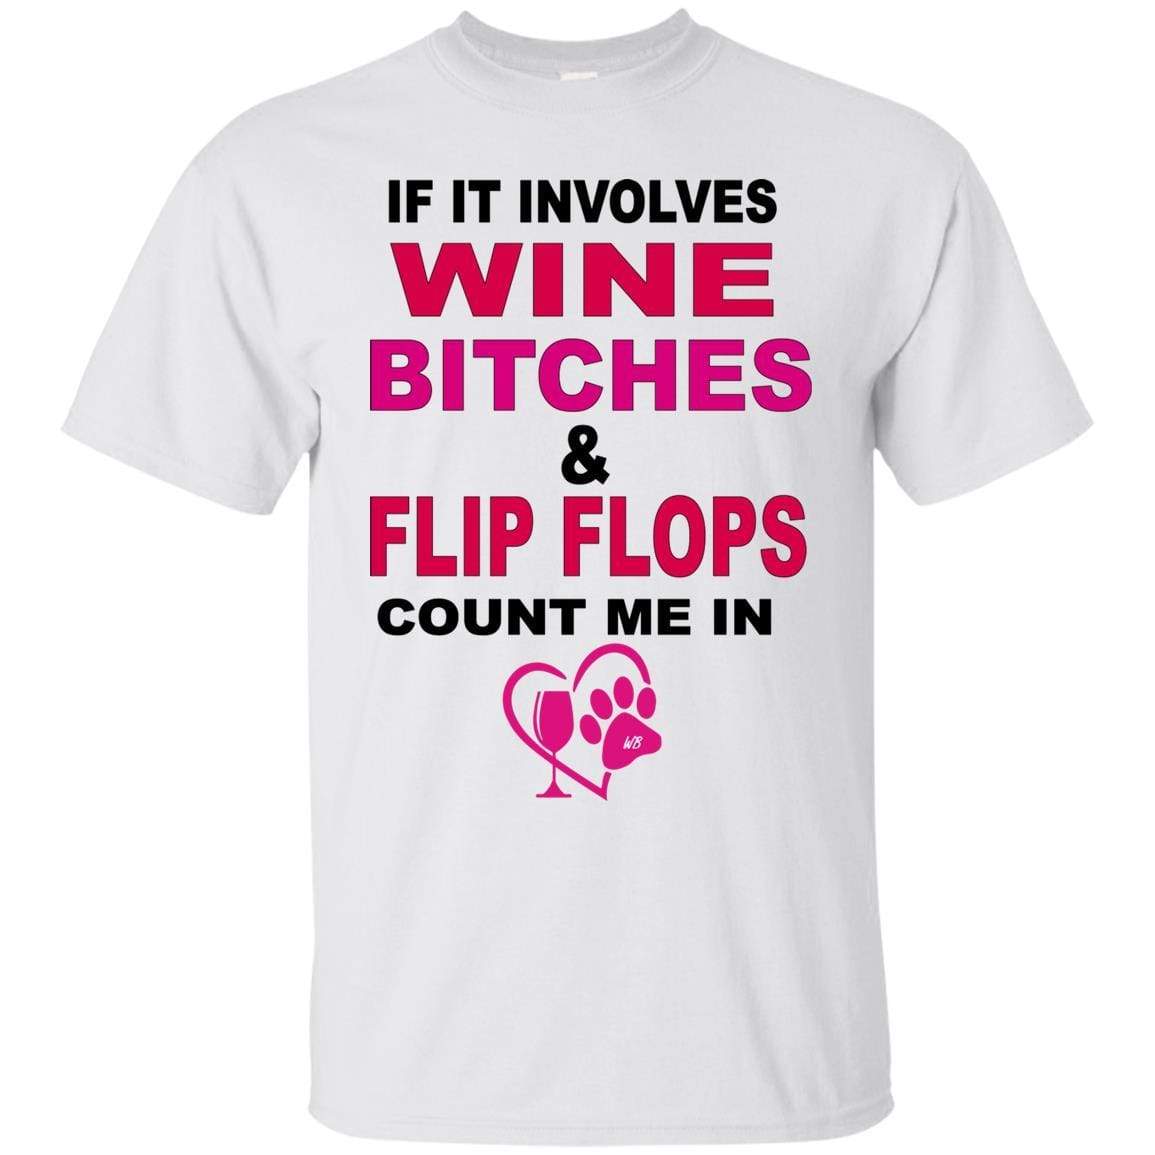 T-Shirts White / S WineyBitches.co " If It Involves Wine Bitches & Flip Flops I'm In" Ultra Cotton Unisex T-Shirt WineyBitches.co Hilariously Funny T-Shirt for Wine & Dog Lovers   WineyBitchesCo